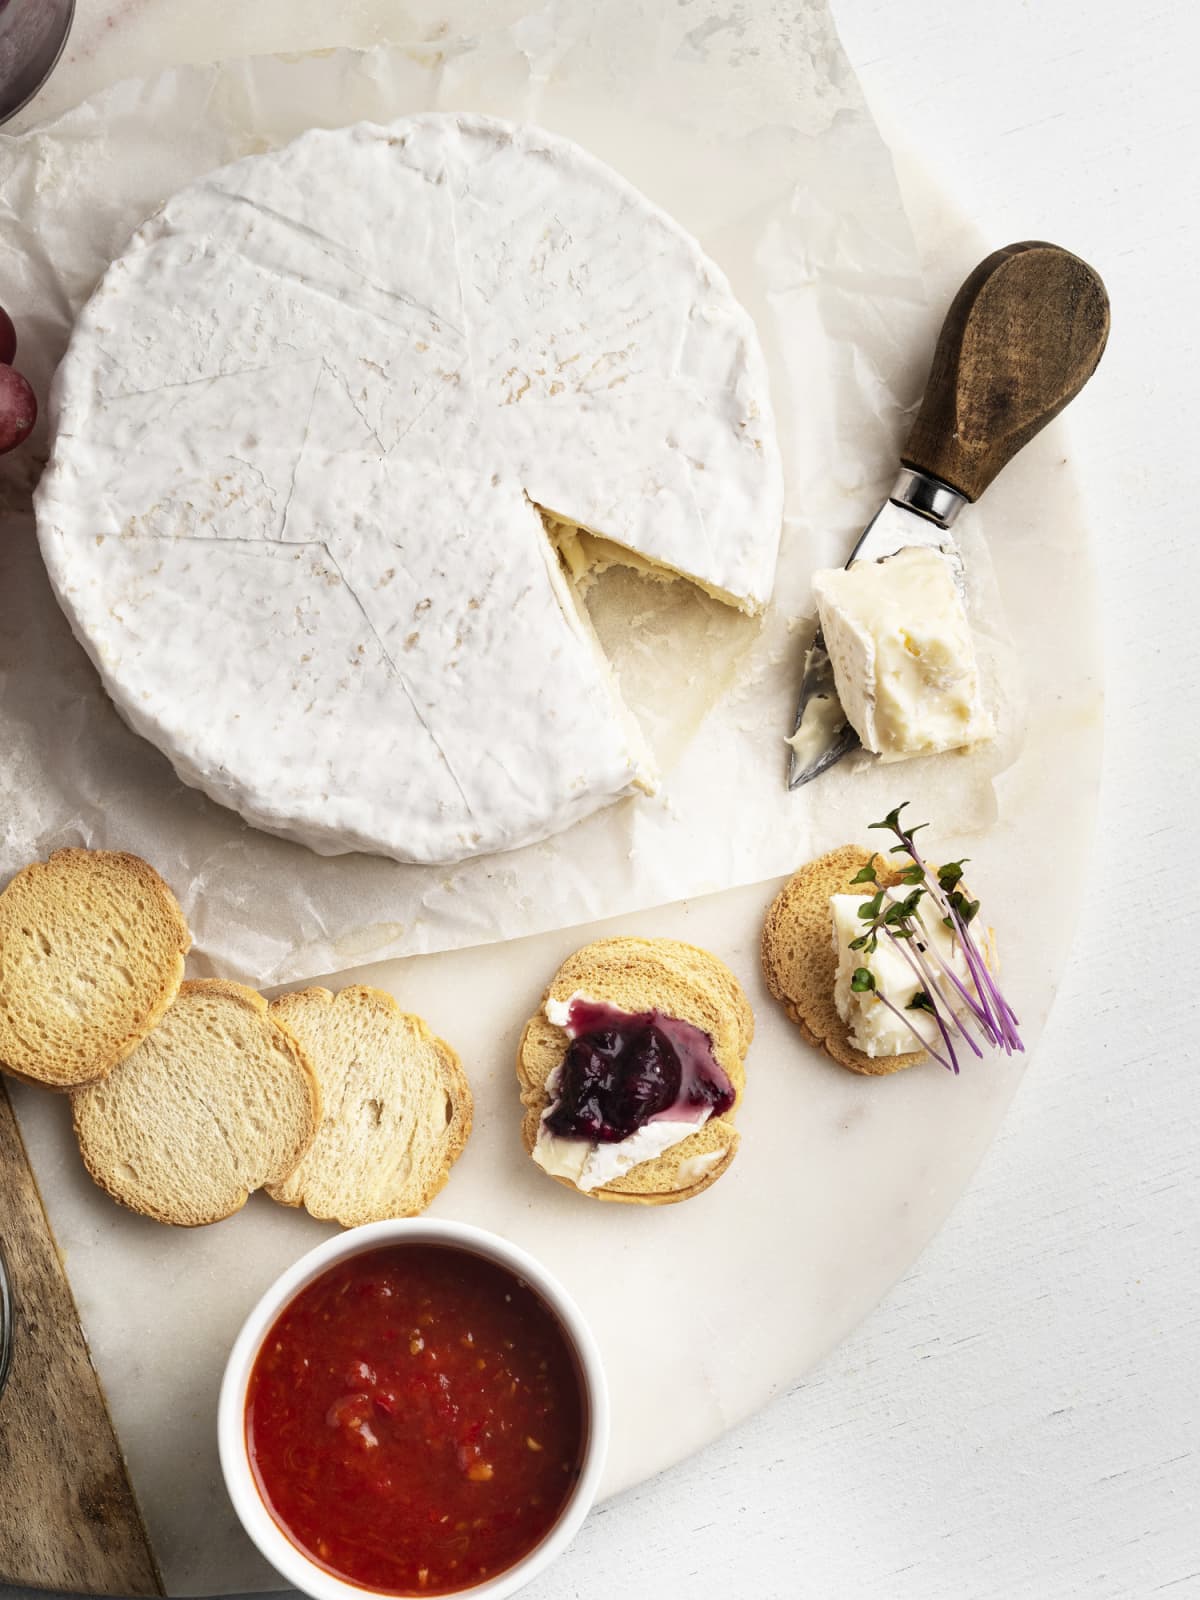 Appetizer, Breakfast, Brie, Camembert, Cheese, food and drink,  Artisan cheeses, marmalade, Camembert cheese, Dairy Product, French Food, France, Milk,